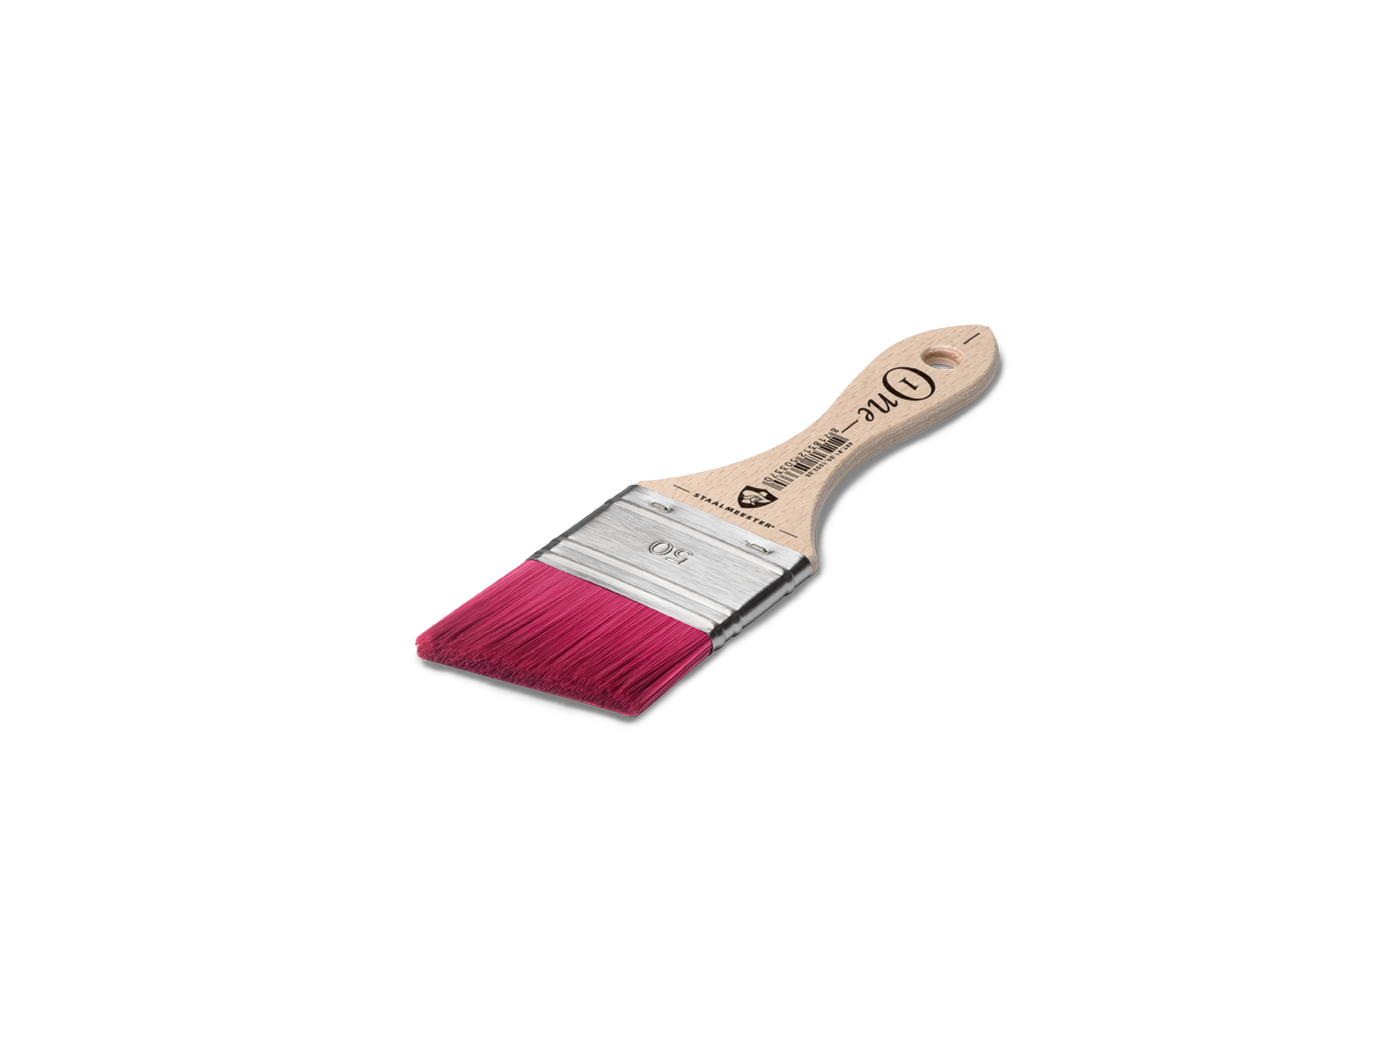 Synthetic Angled Workshop Brush (2) by Fusion Mineral Paint